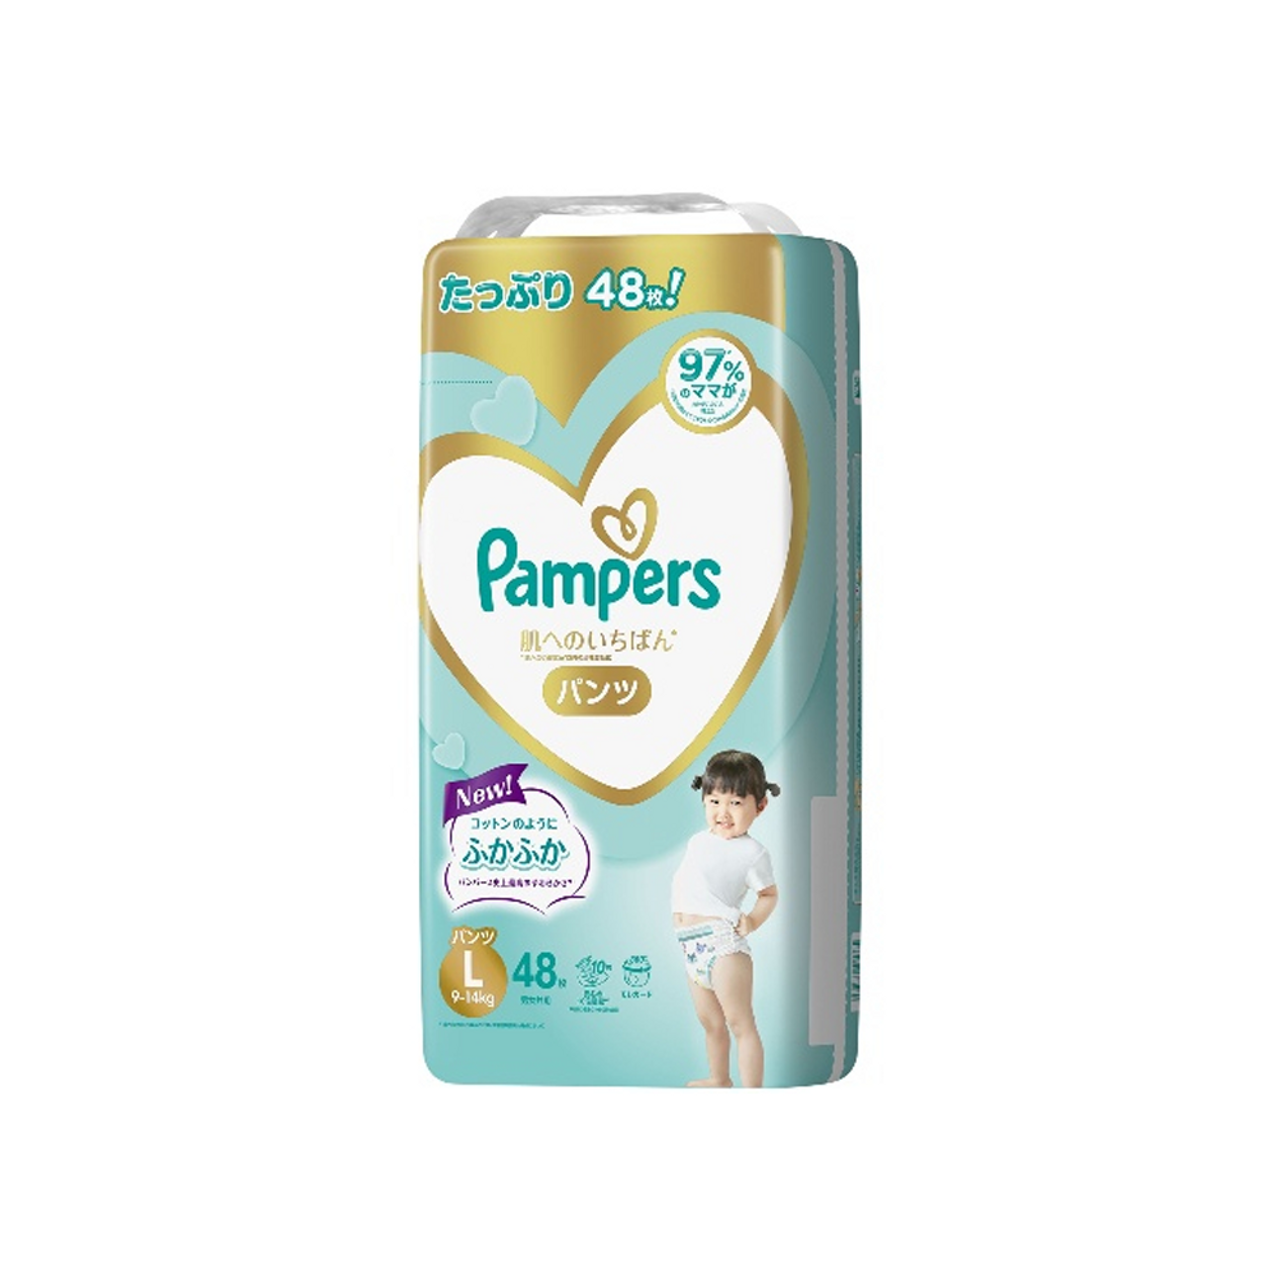 Pampers Large size baby diapers 48 peace, Lotion with Aloe Vera - L - Buy  84 Pampers Pant Diapers | Flipkart.com